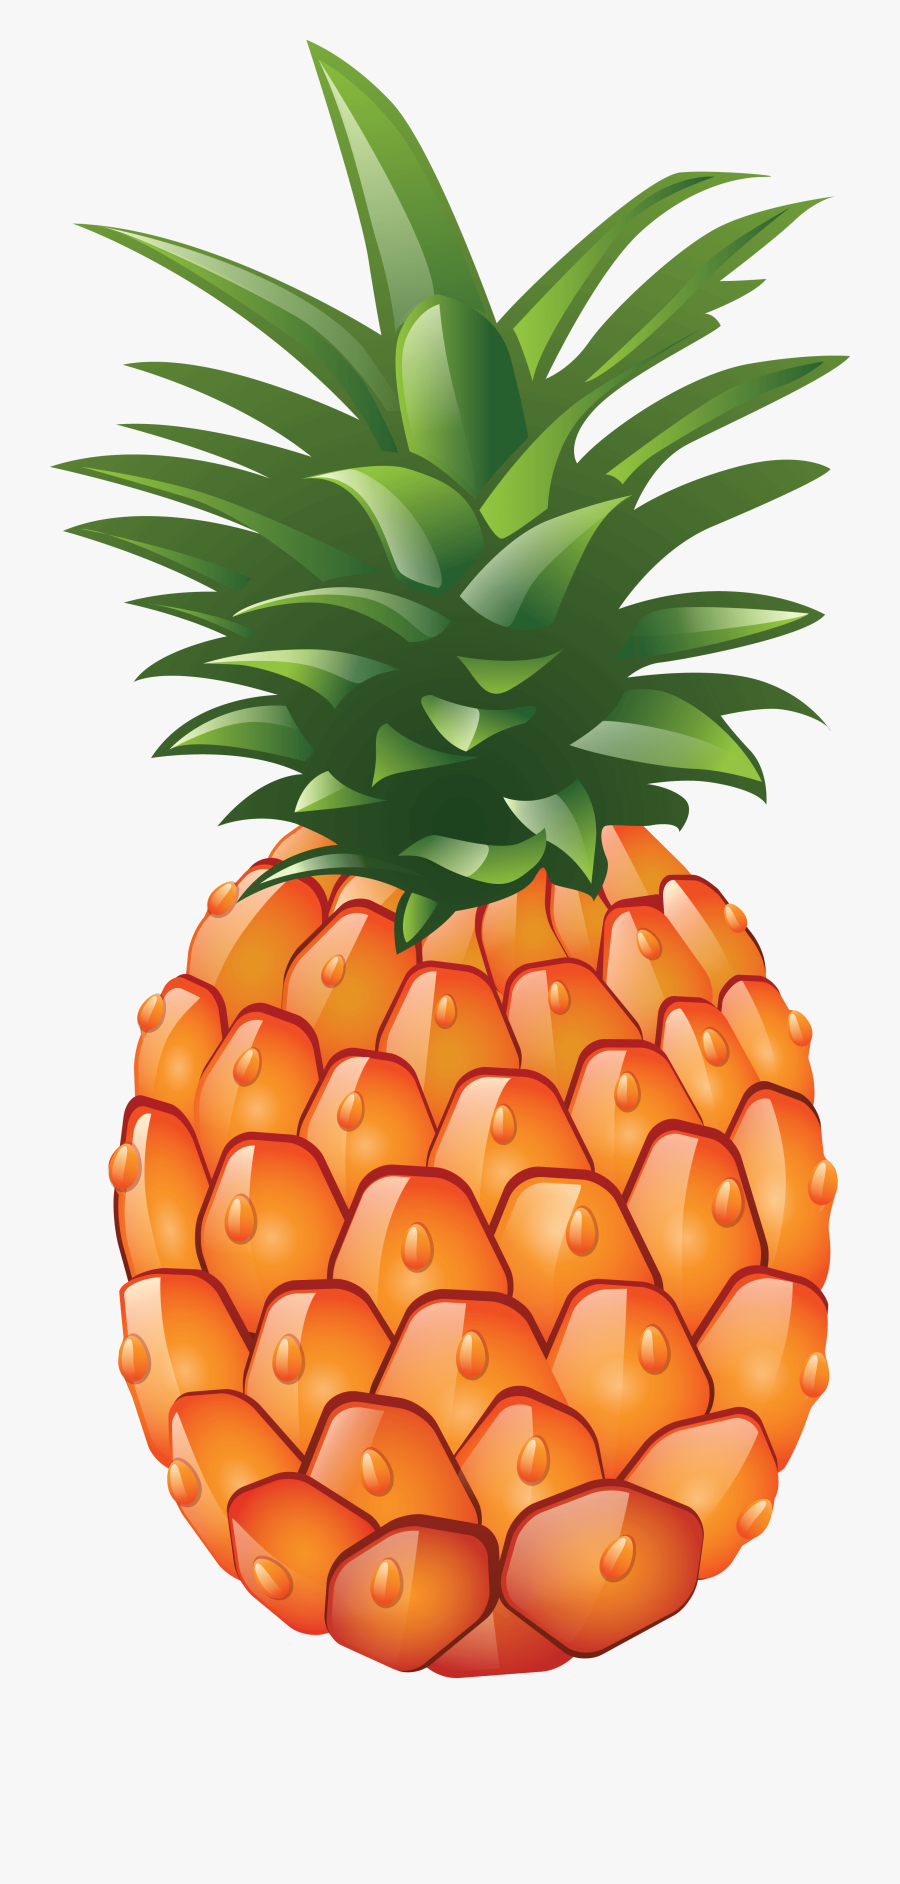 Pineapple Png Photo Image - Png Pineapple, Transparent Clipart